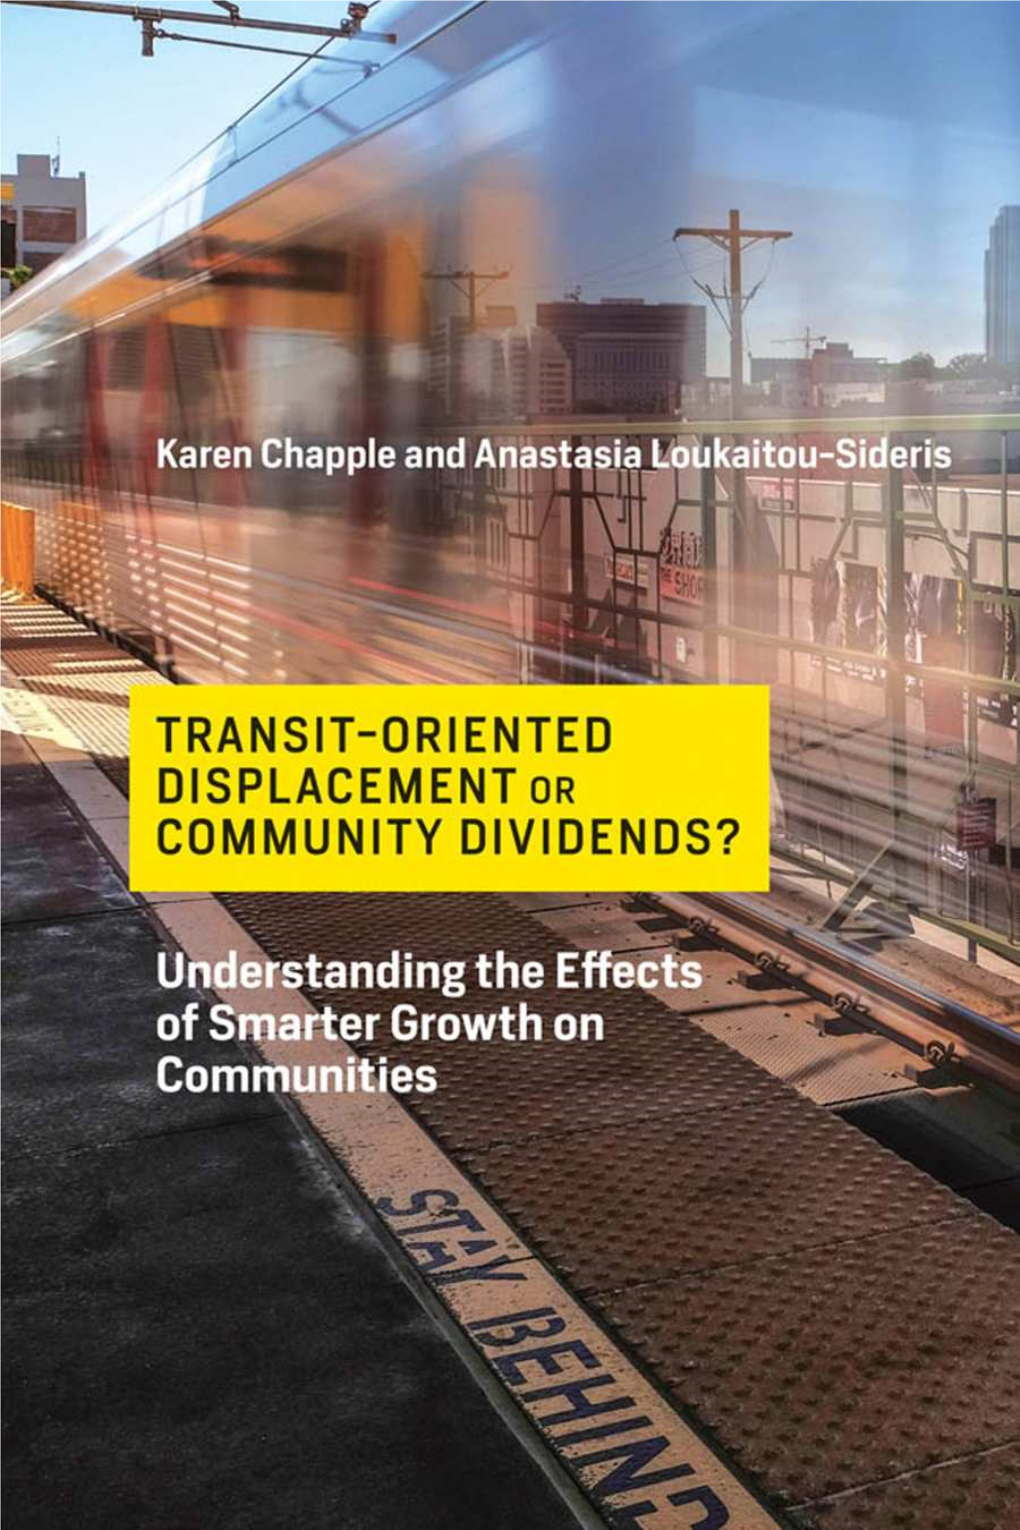 Transit-Oriented Displacement Or Community Dividends? : Understanding the Effects of Smarter Growth on Communities / Karen Chapple and Anastasia Loukaitou-Sideris